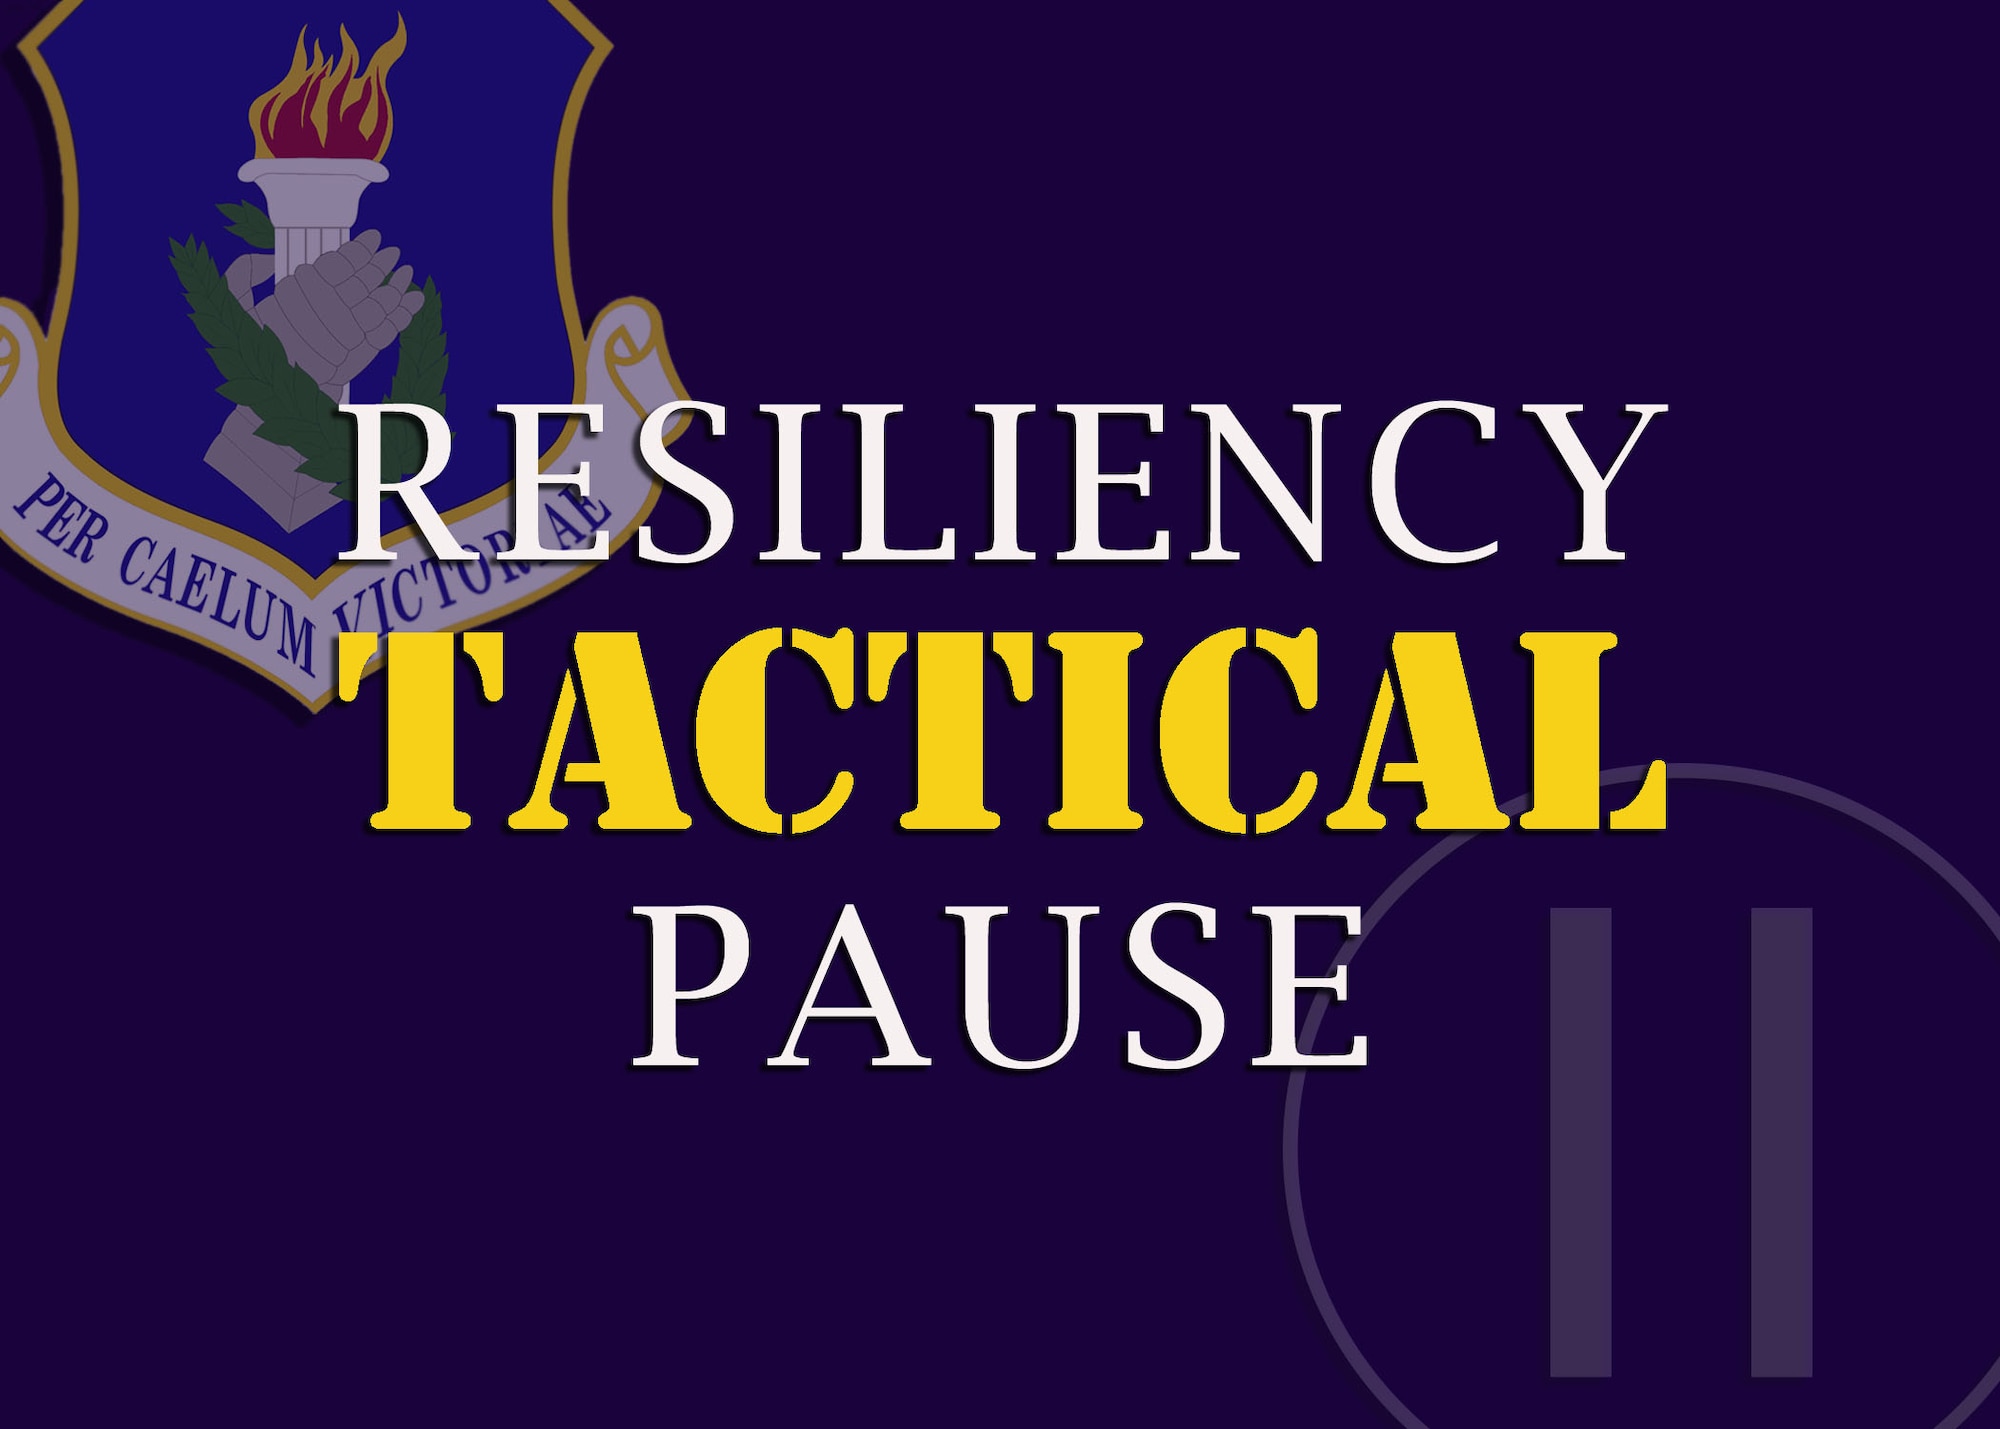 Resiliency Tactical Pause